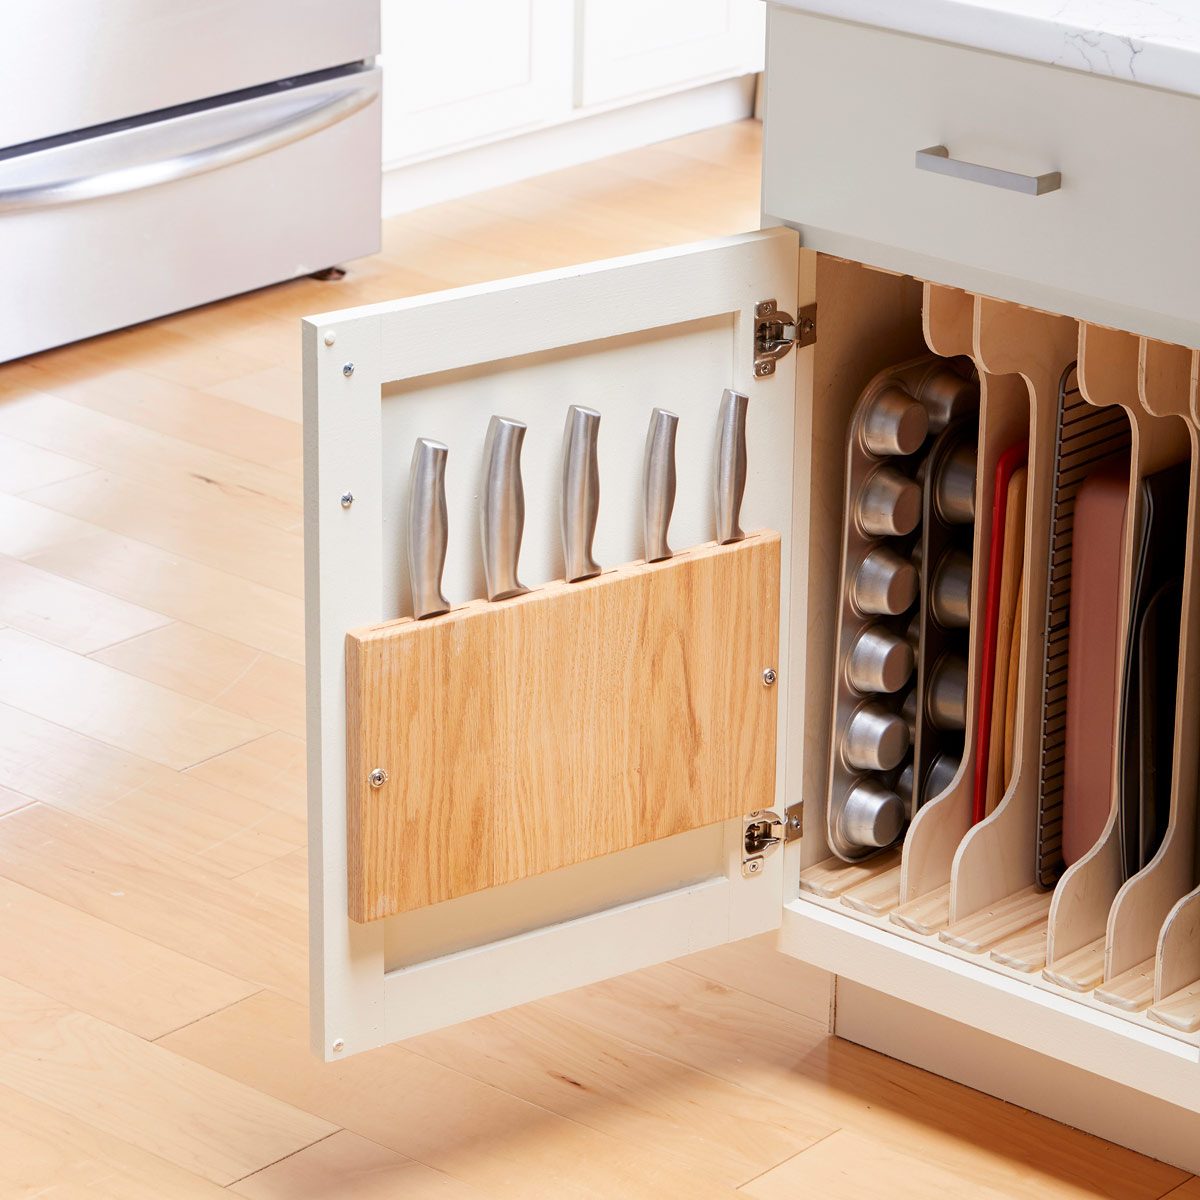 How To Make A Knife Rack For Inside Your Cabinet Family Handyman